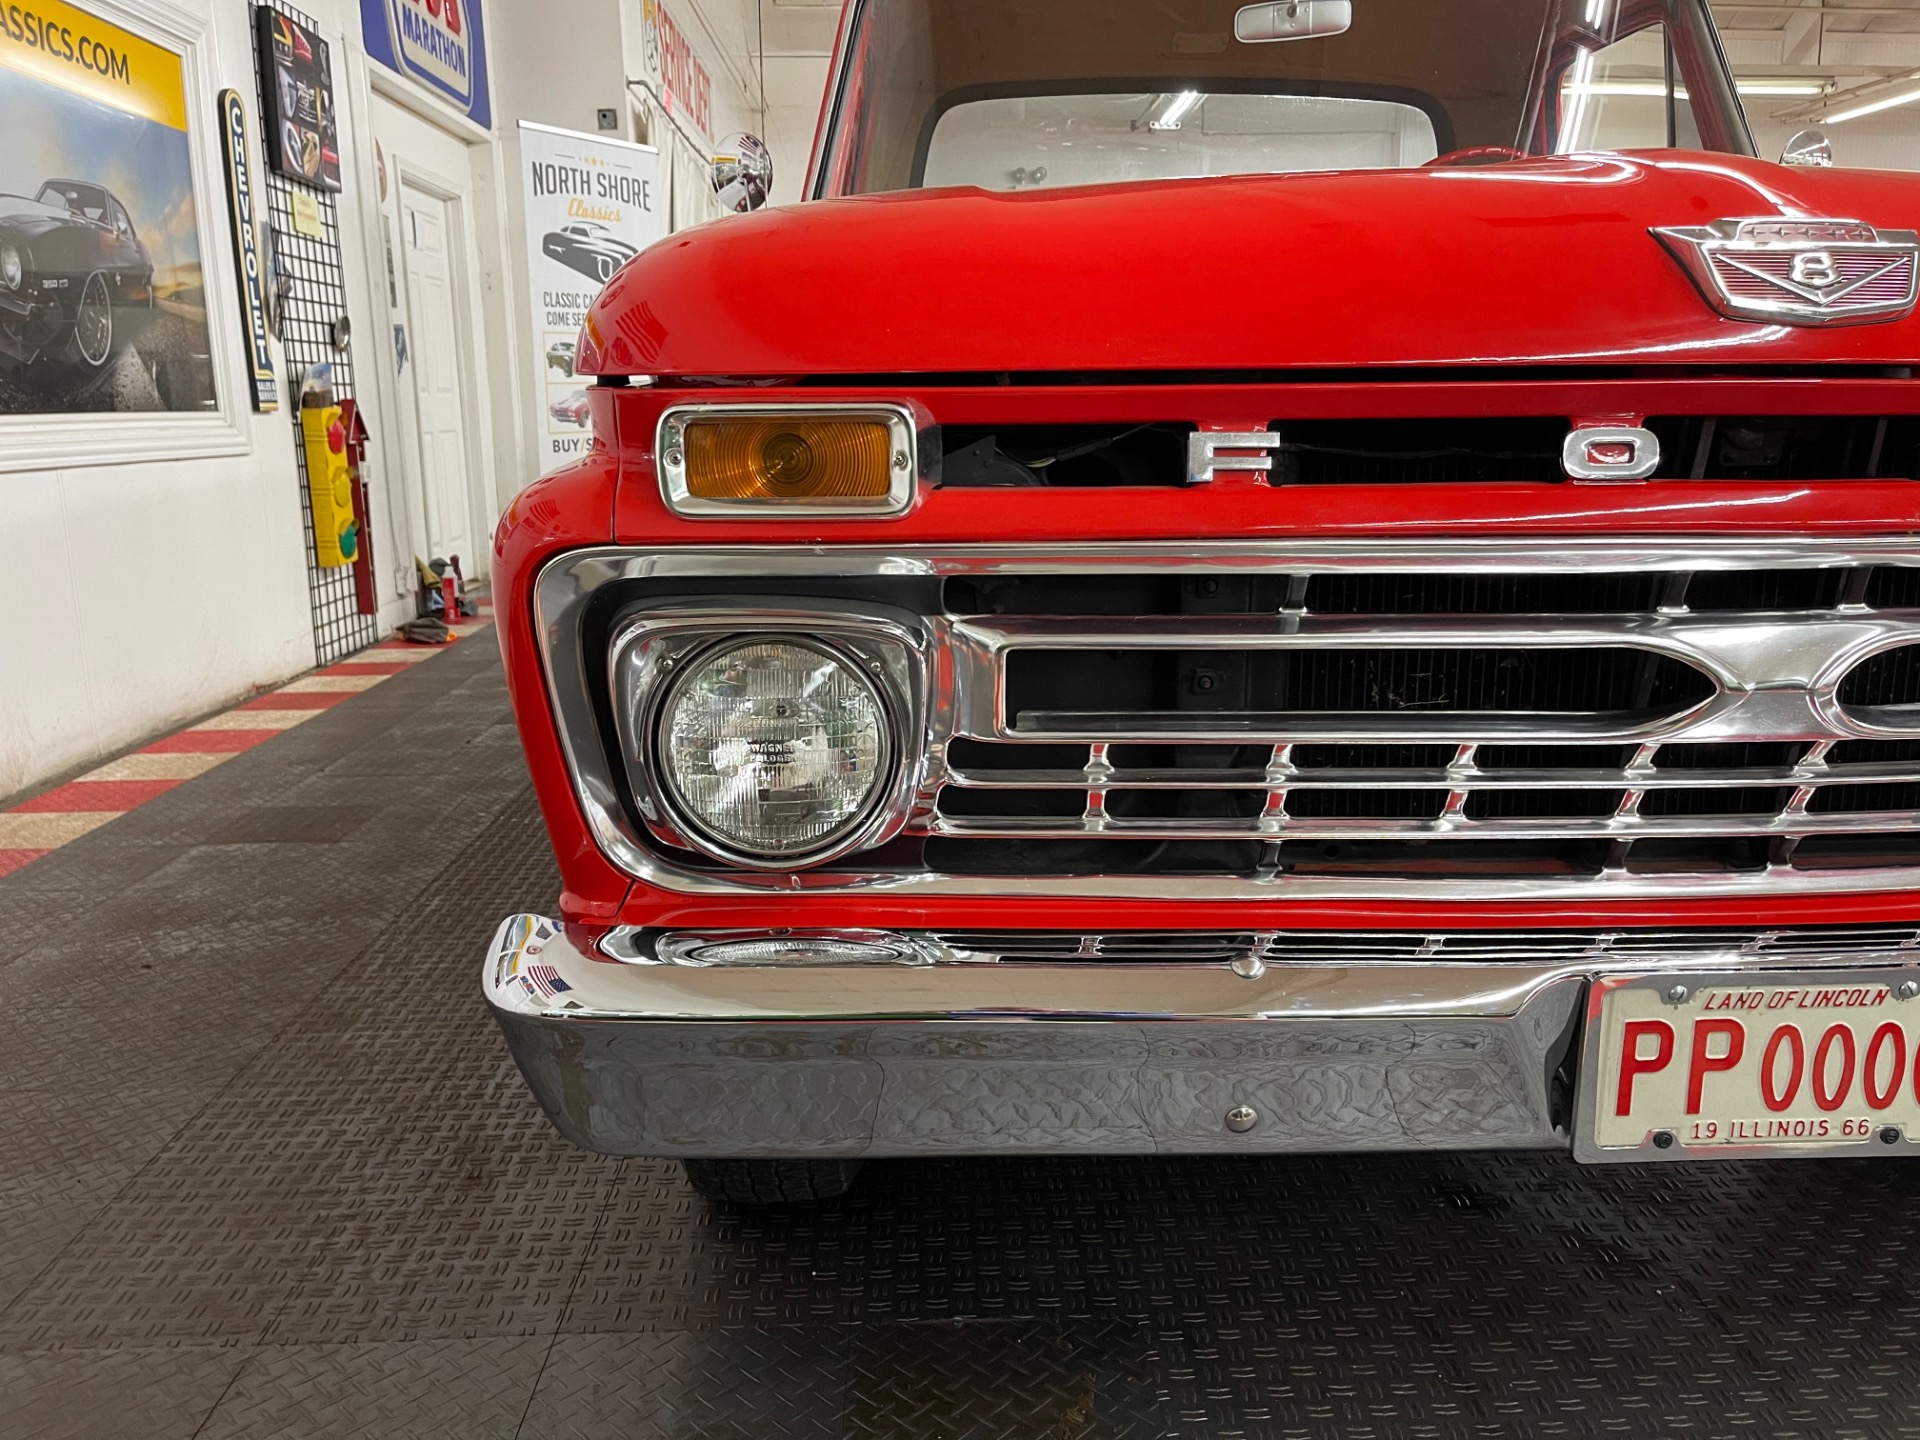 1966 Ford F100 9